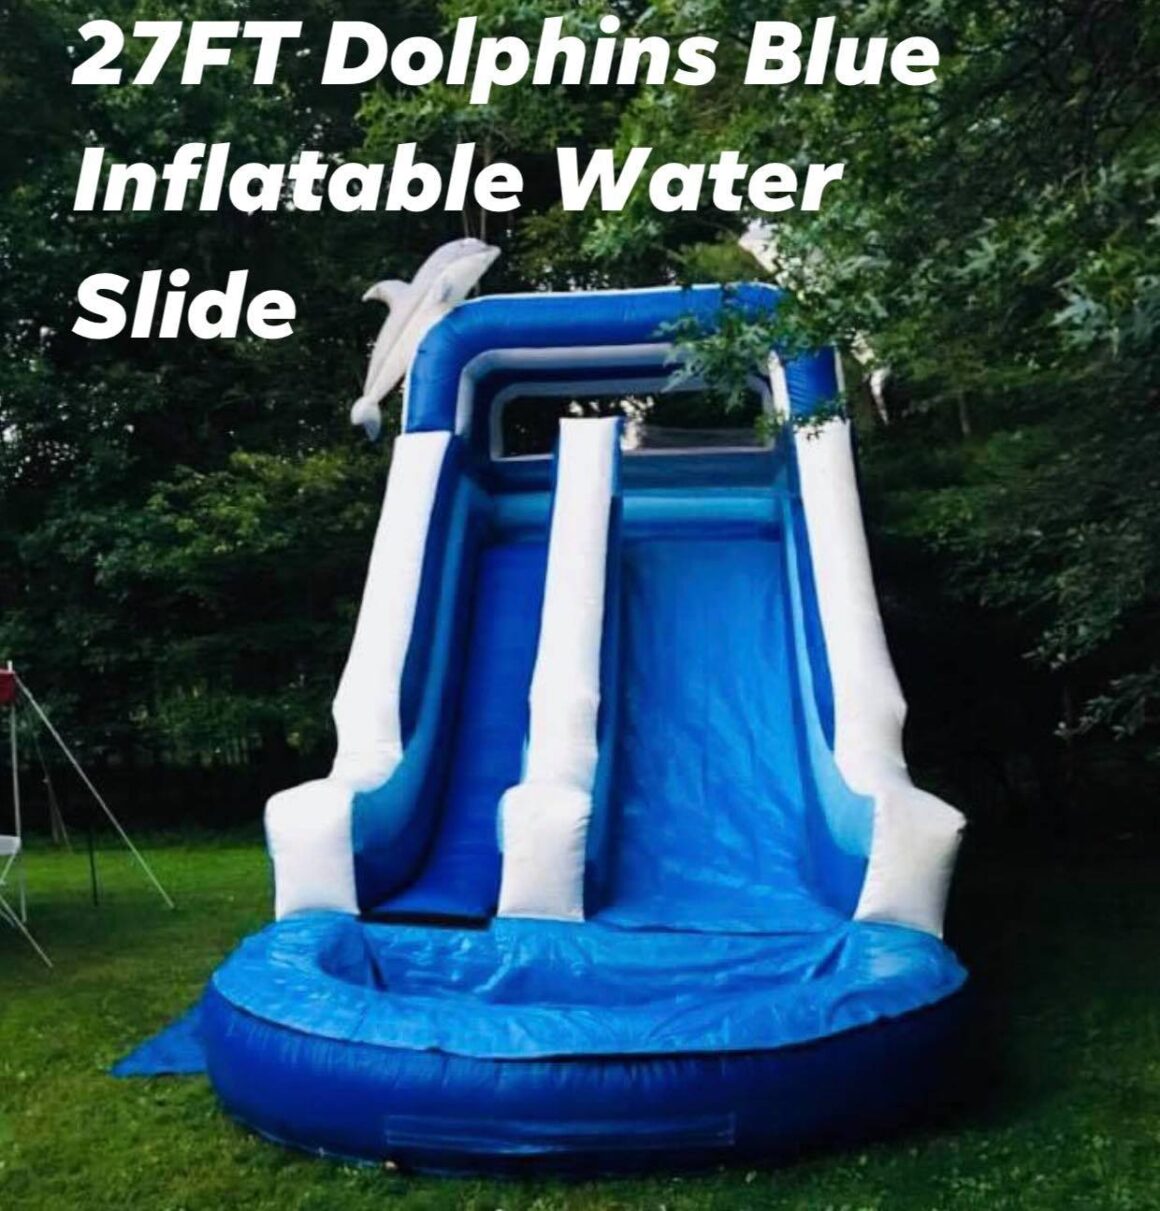 Dolphins Blue Inflatable Water Slide